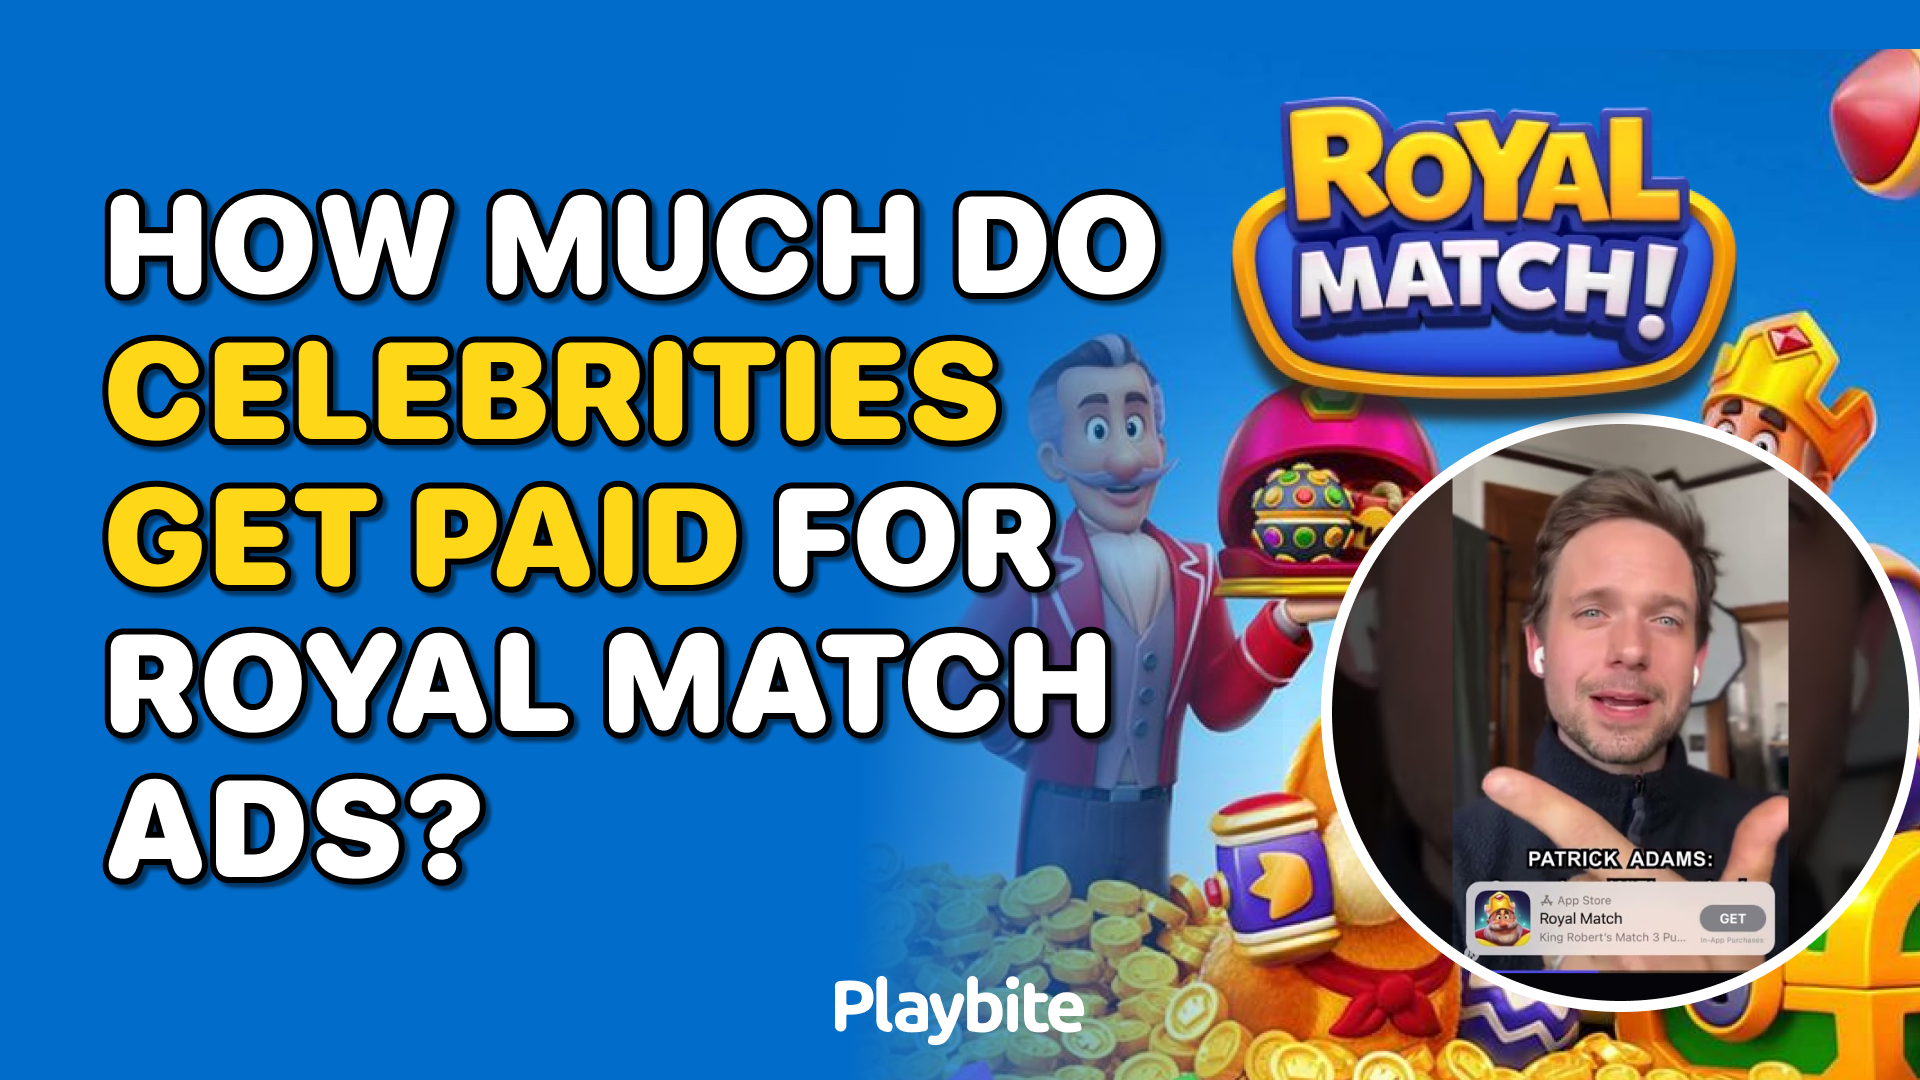 How Much Do Celebrities Get Paid for Royal Match Ads?